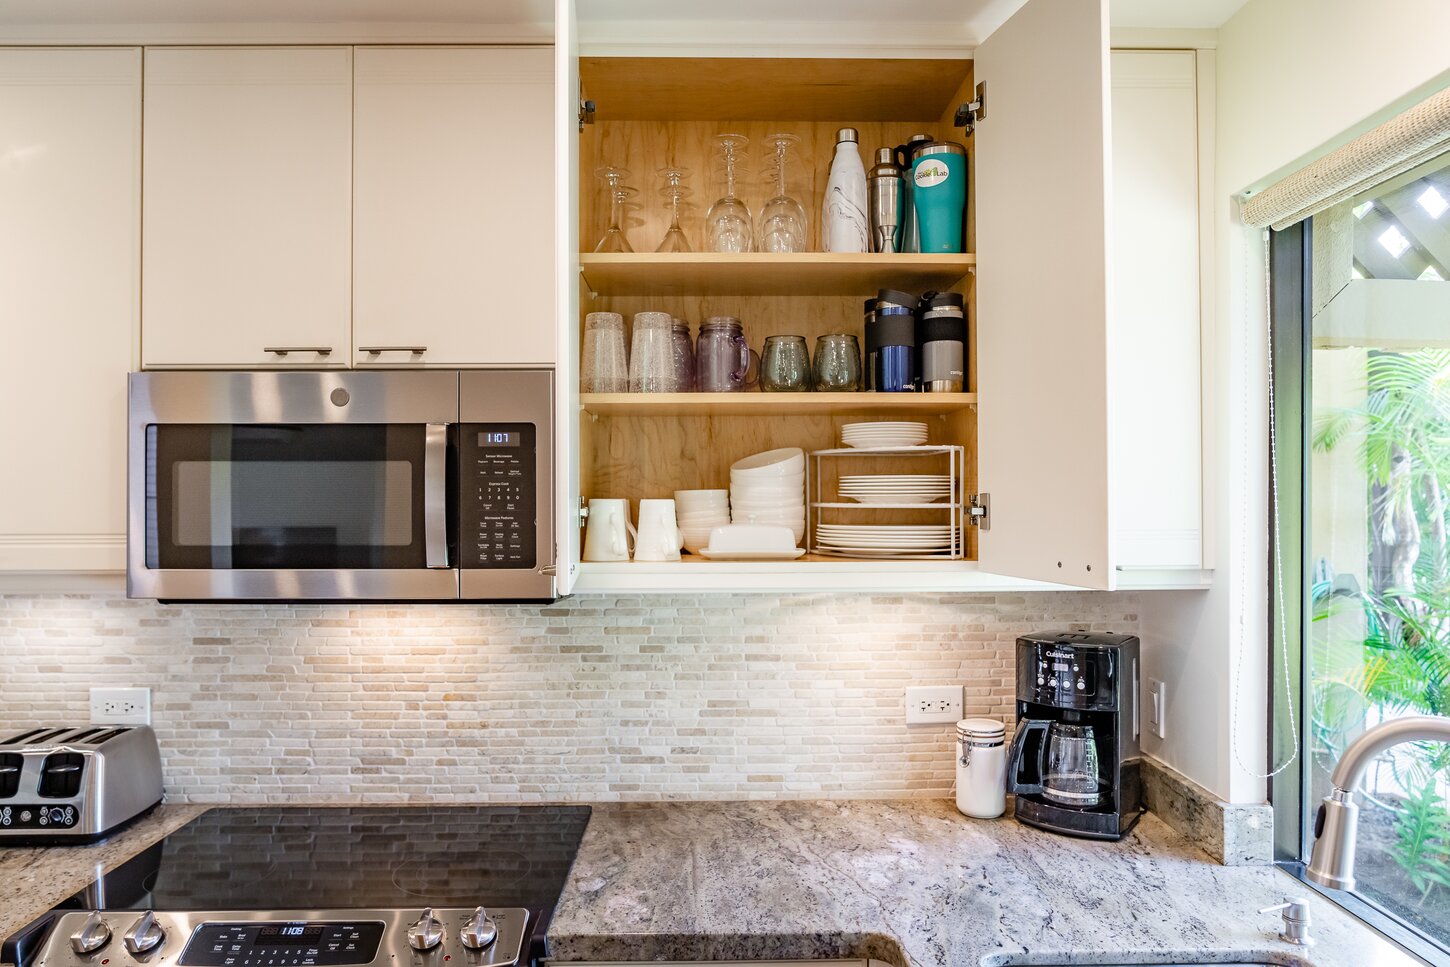 A kitchen starter set including coffee, oil, basic spices, and paper sundries is provided to make your arrival as relaxing as possible! Grocery deliveries, pick ups, and the local high-end convenience store can supply the rest!